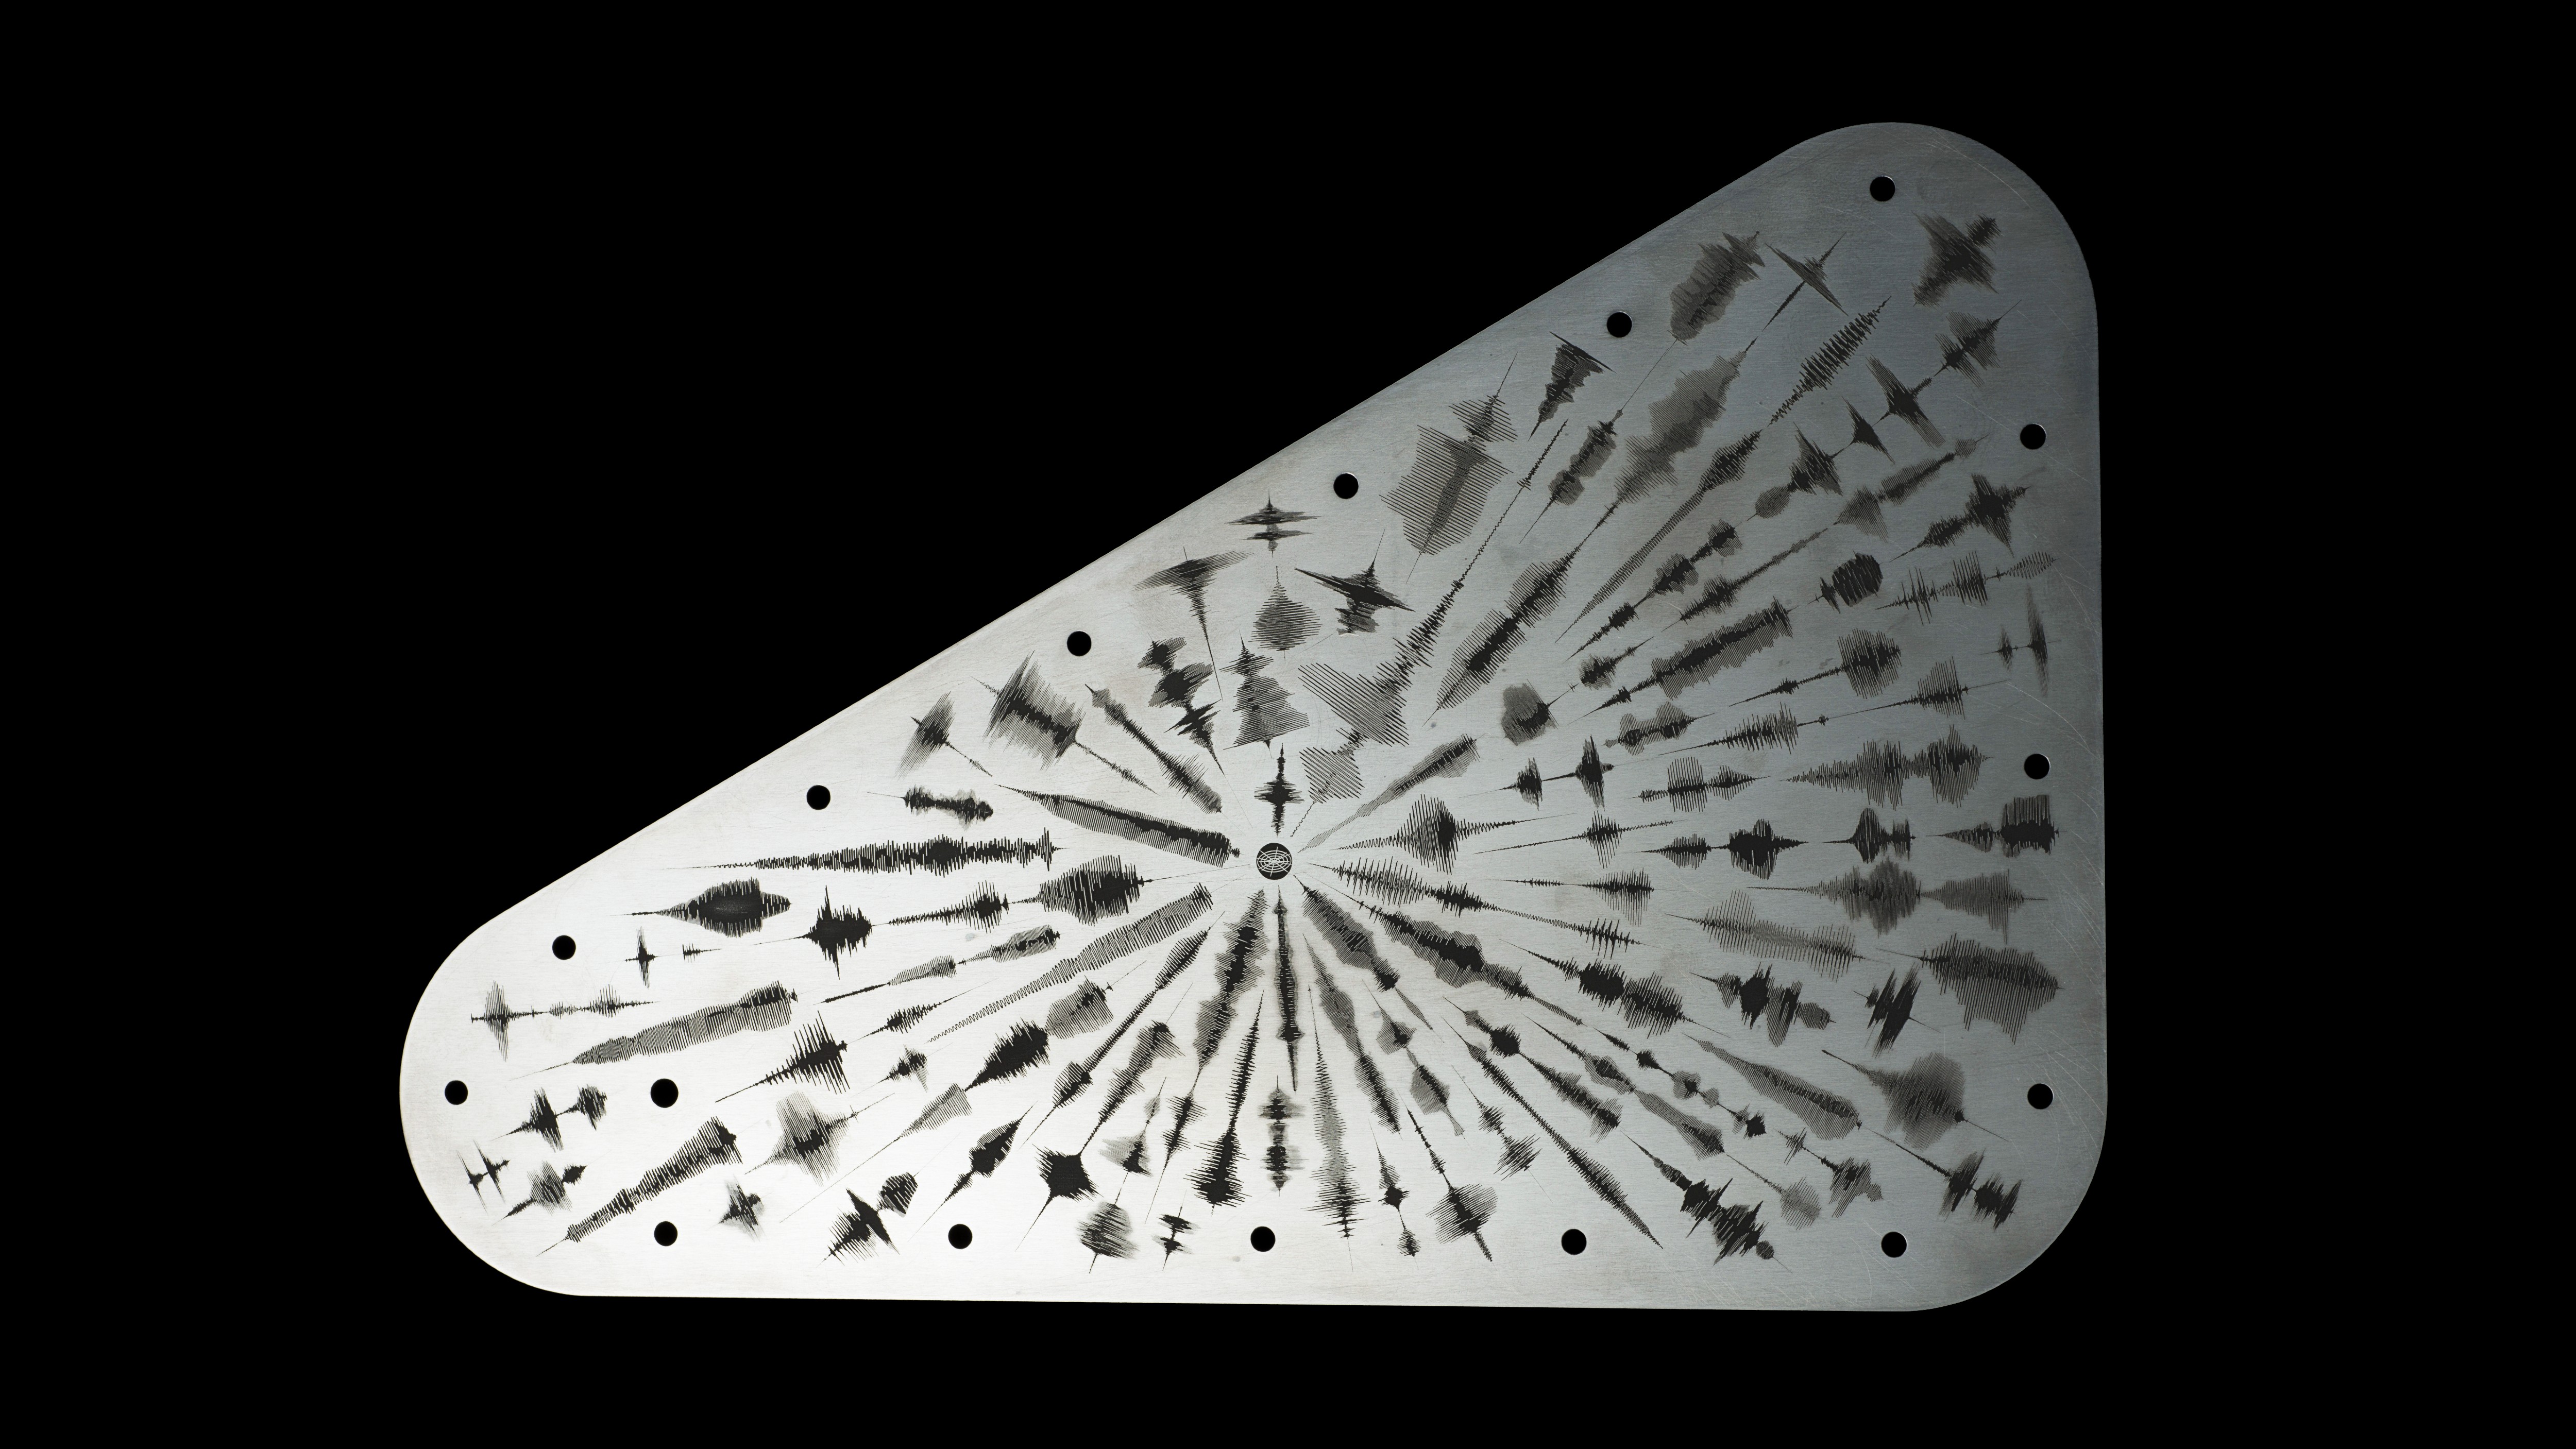 Triangular metal plate with radial pattern of drilled holes and engraved lines, creating a burst effect, isolated on black background.